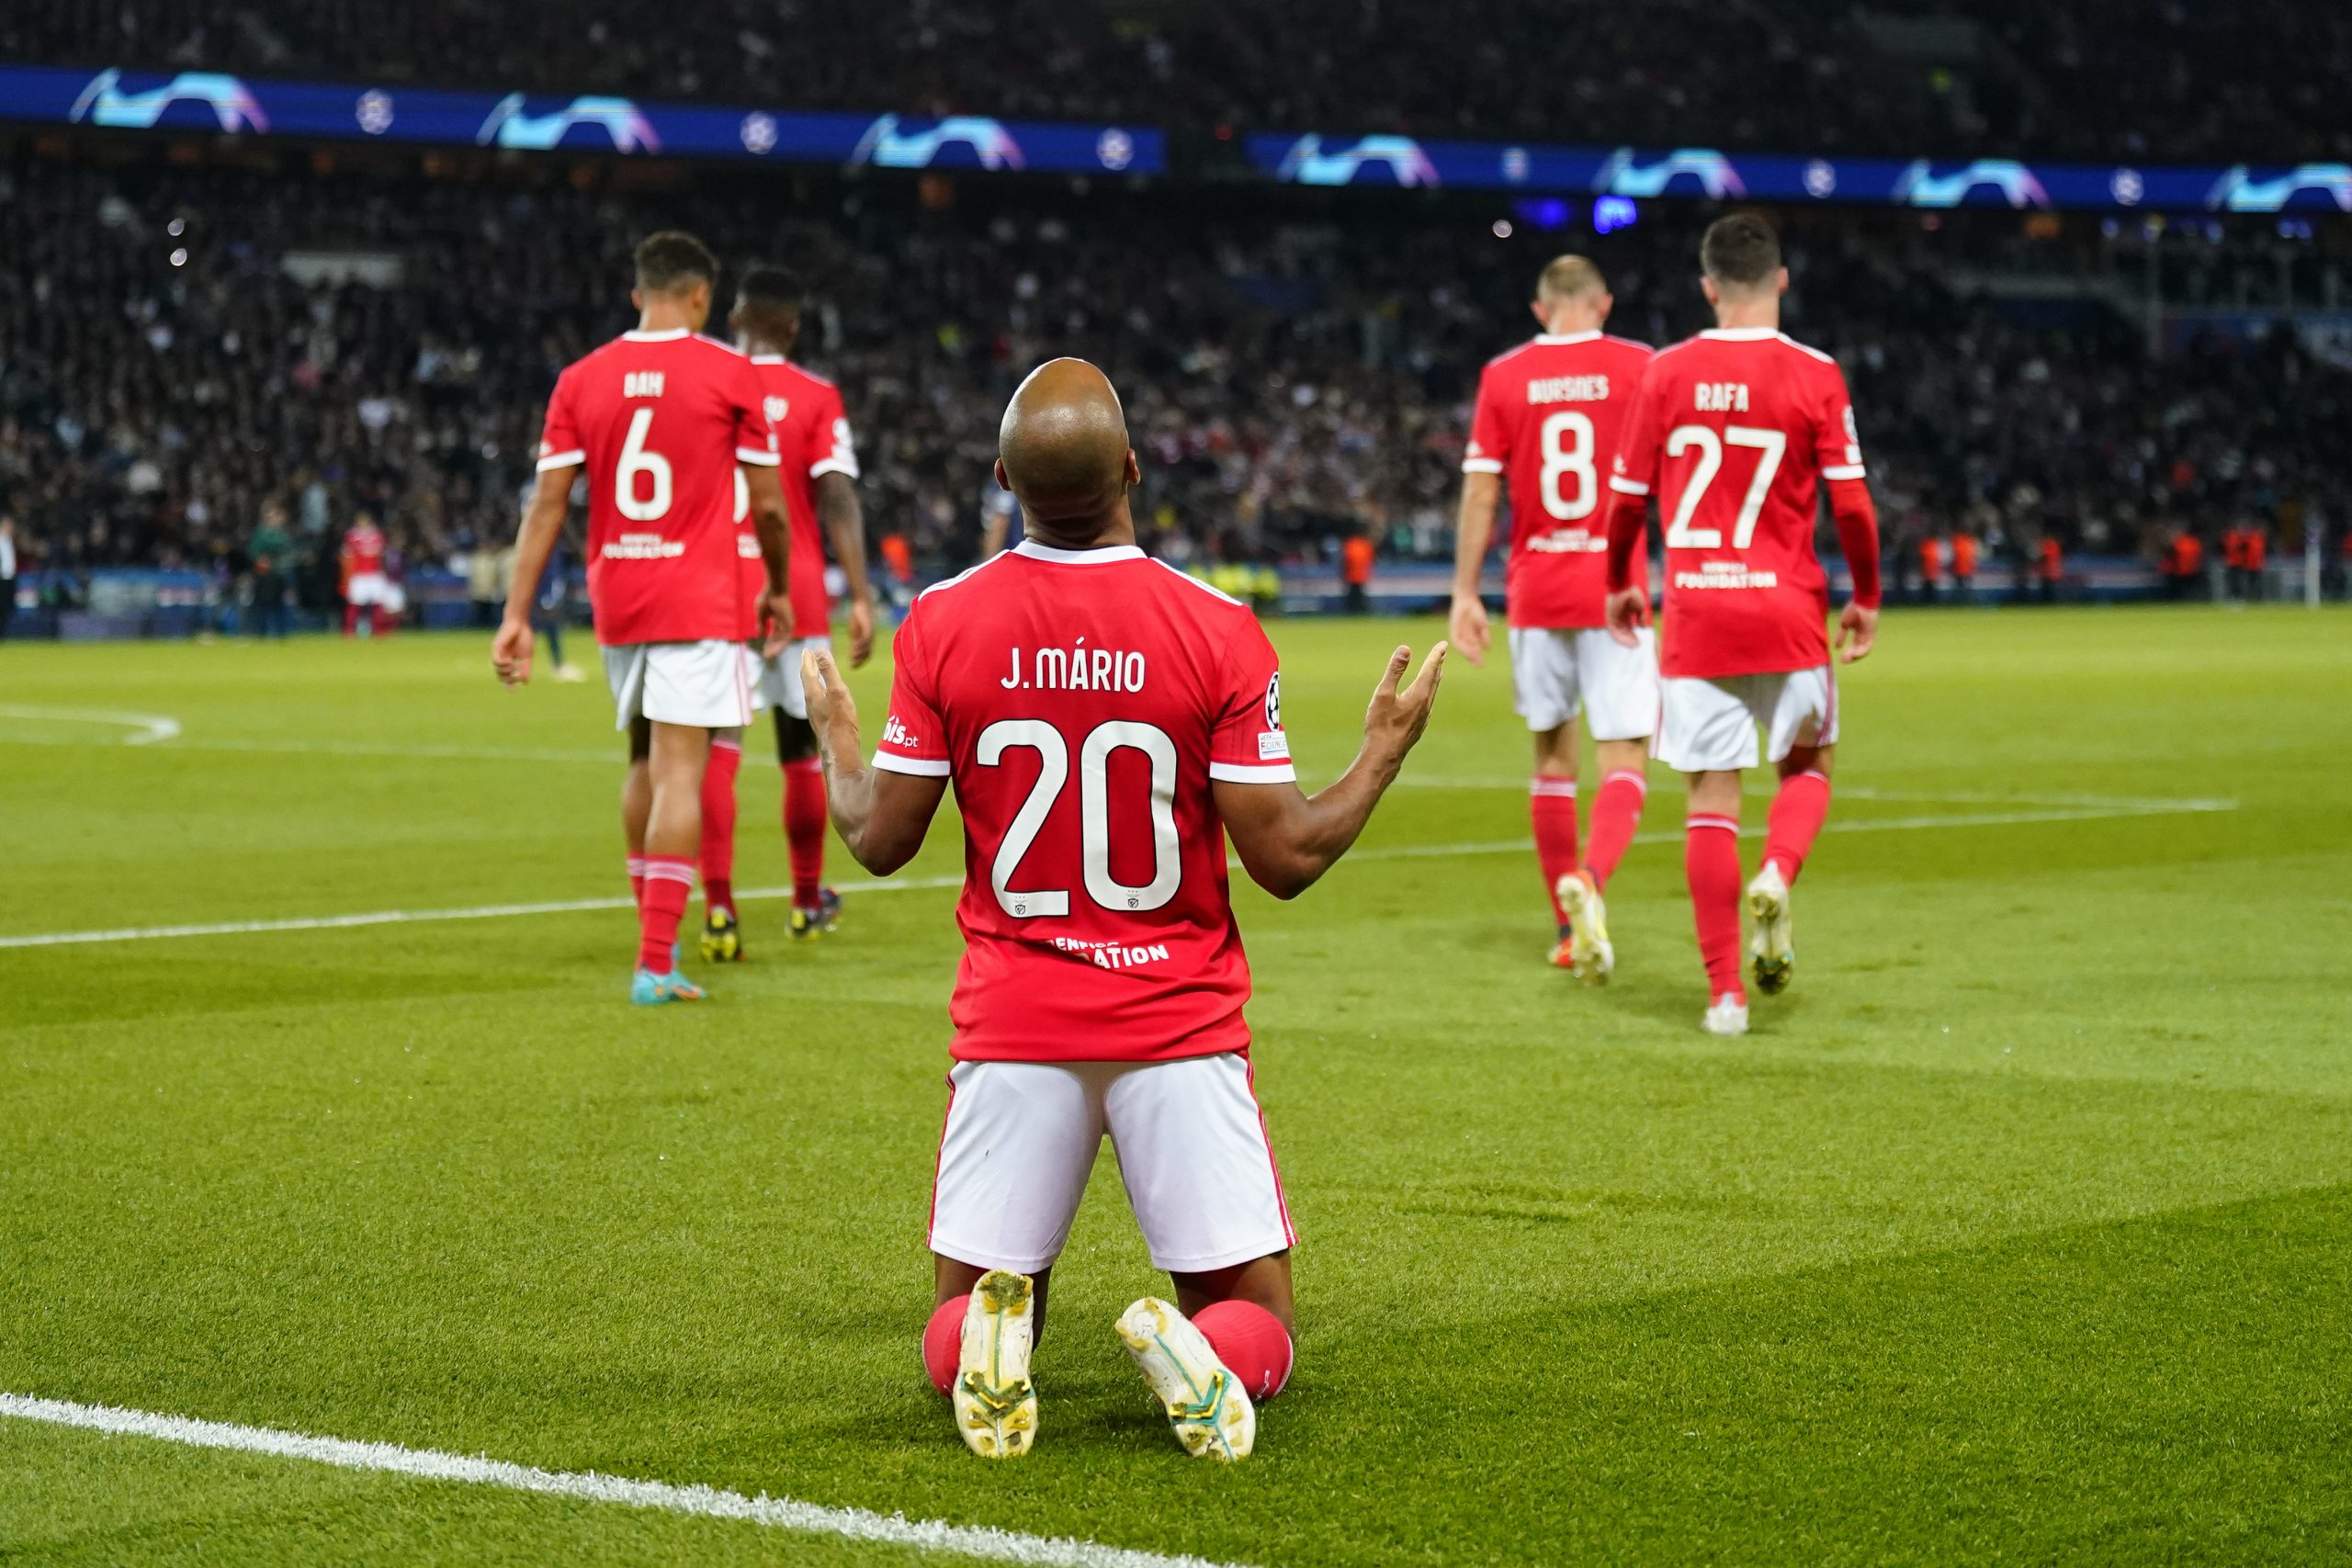 PARIS, FRANCE - OCTOBER 11: Joao Mario (20) reacts after scoring a goal (penalty) during the Champions League match between Paris Saint-Germain (PSG) and SL Benfica on October 11, 2022, at Parc des Princes Stadium in Paris, France. (Photo by Glenn Gervot/Icon Sportswire)(Photo by Glenn Gervot/Icon Sportswire) (Icon Sportswire via AP Images)